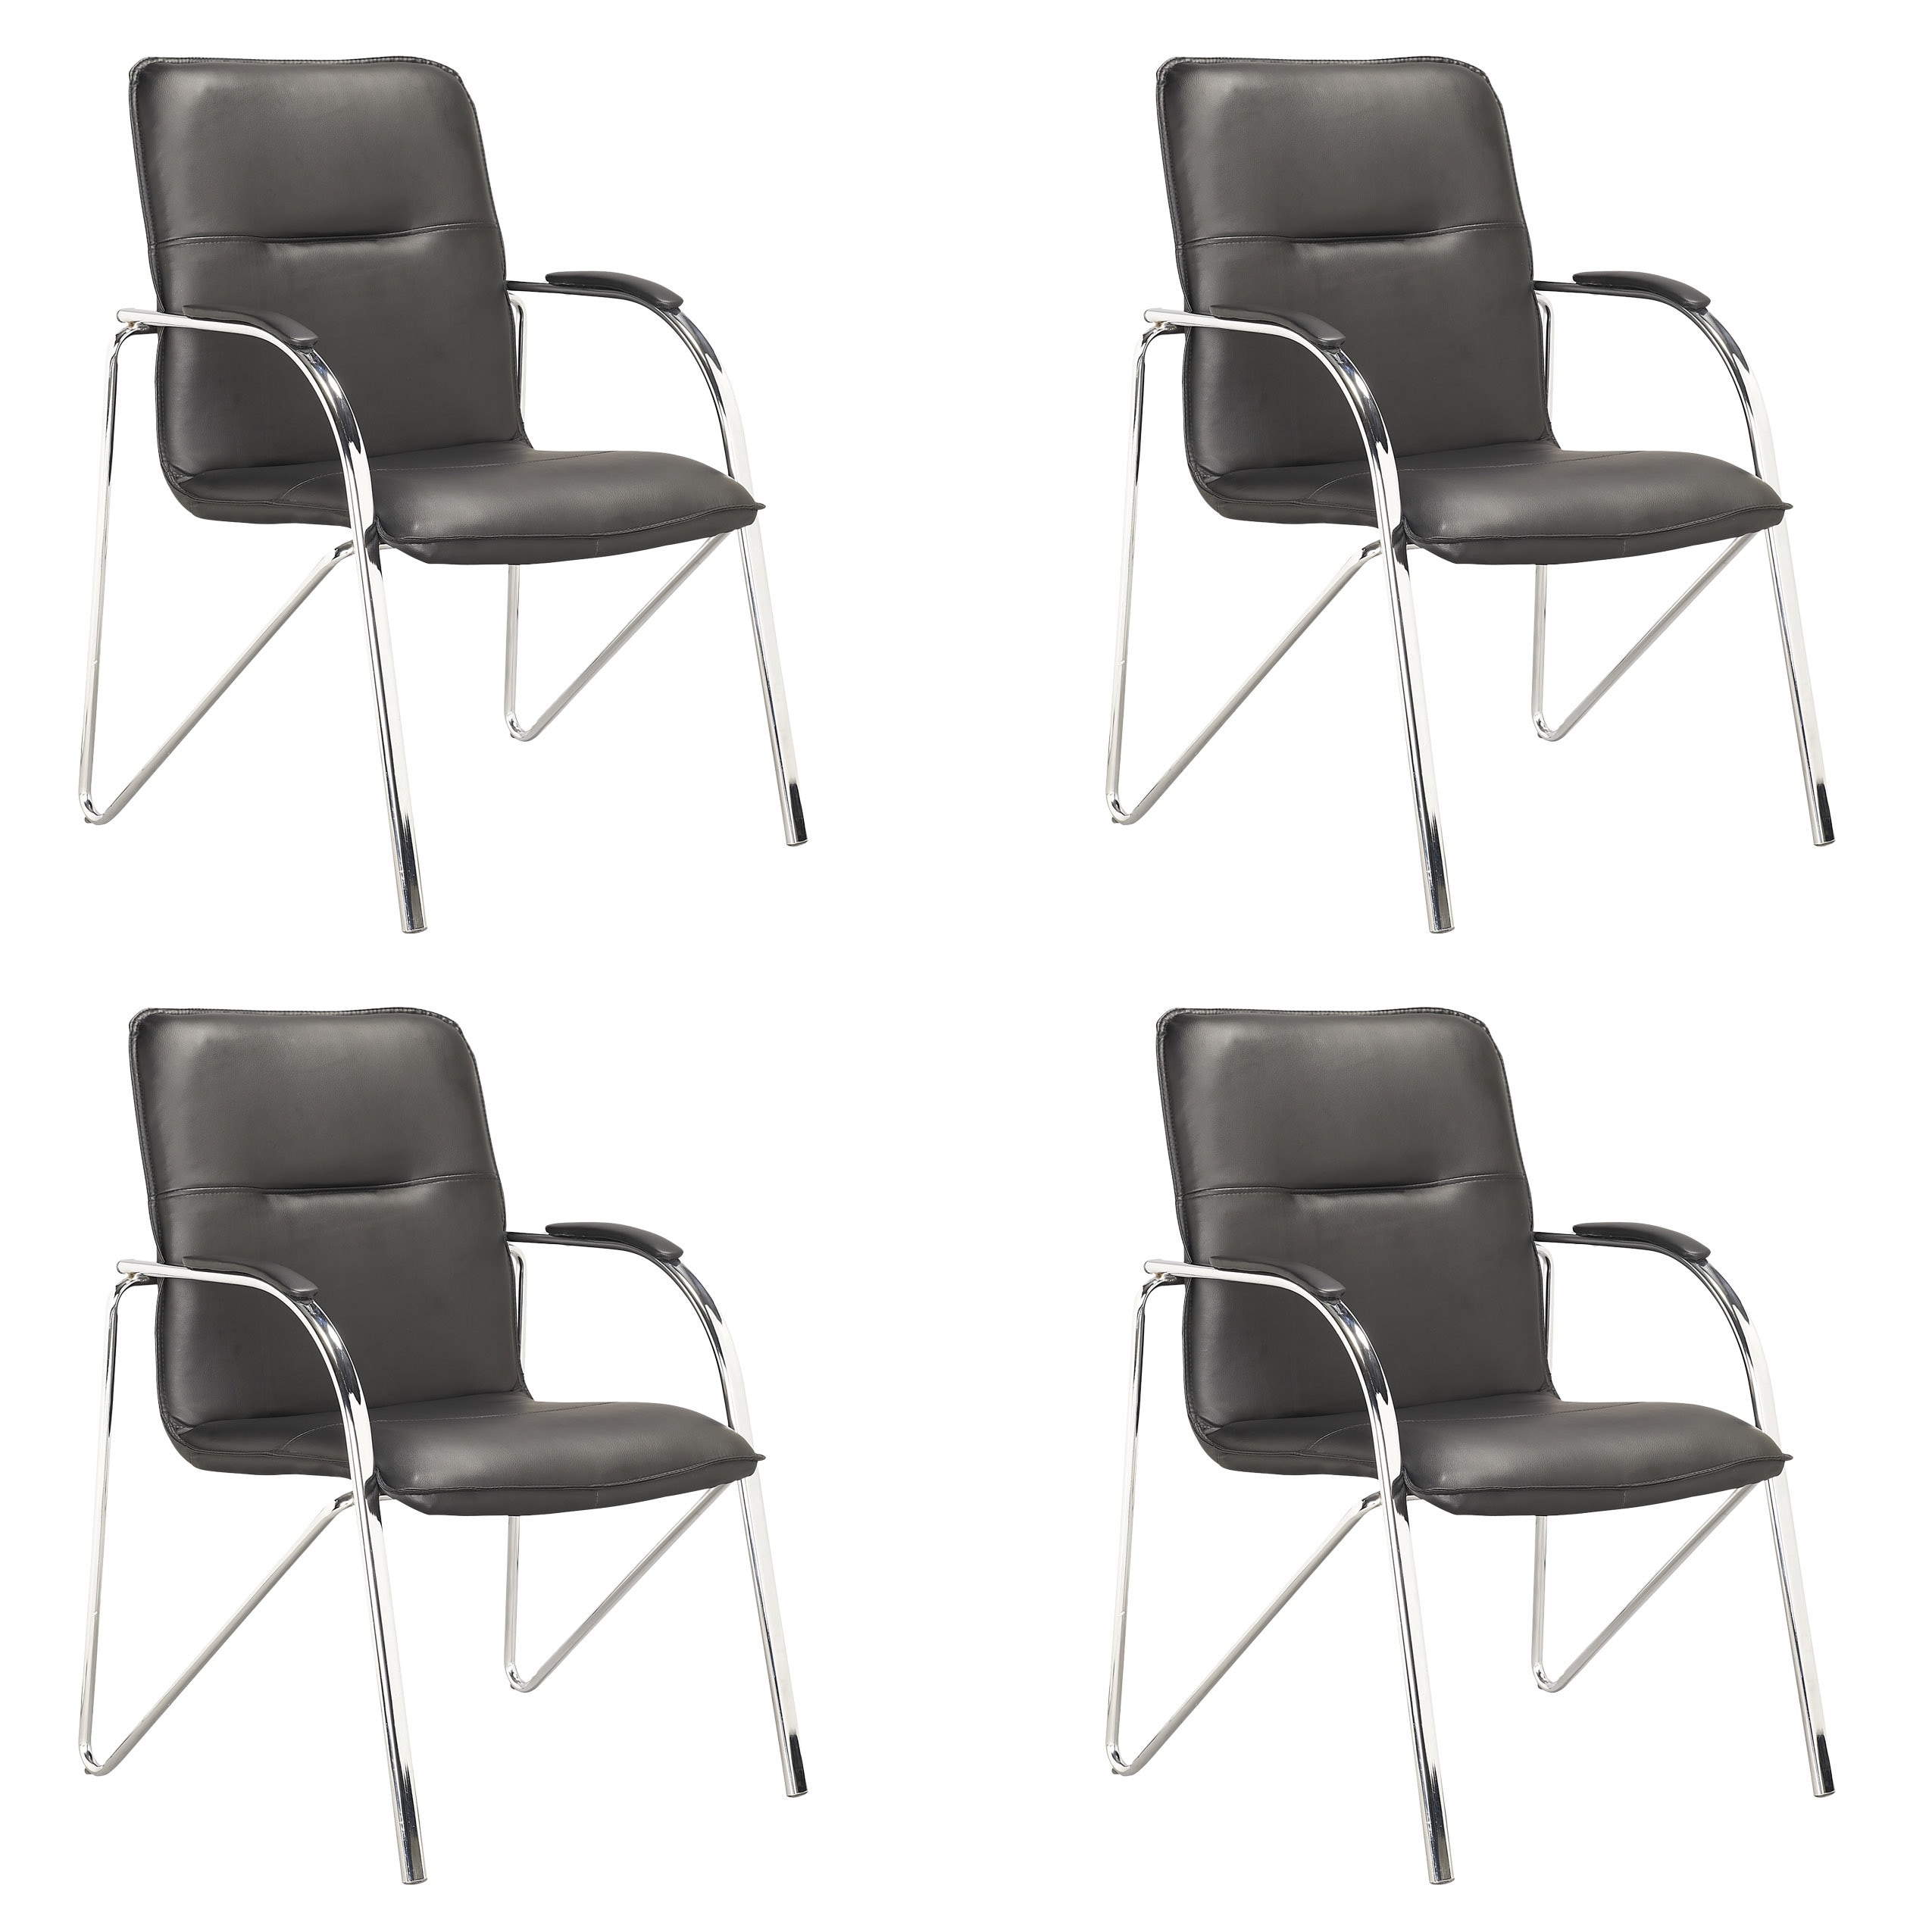 Corliving Lof 909 o Black Leatherette Conference Chair (set Of 4)